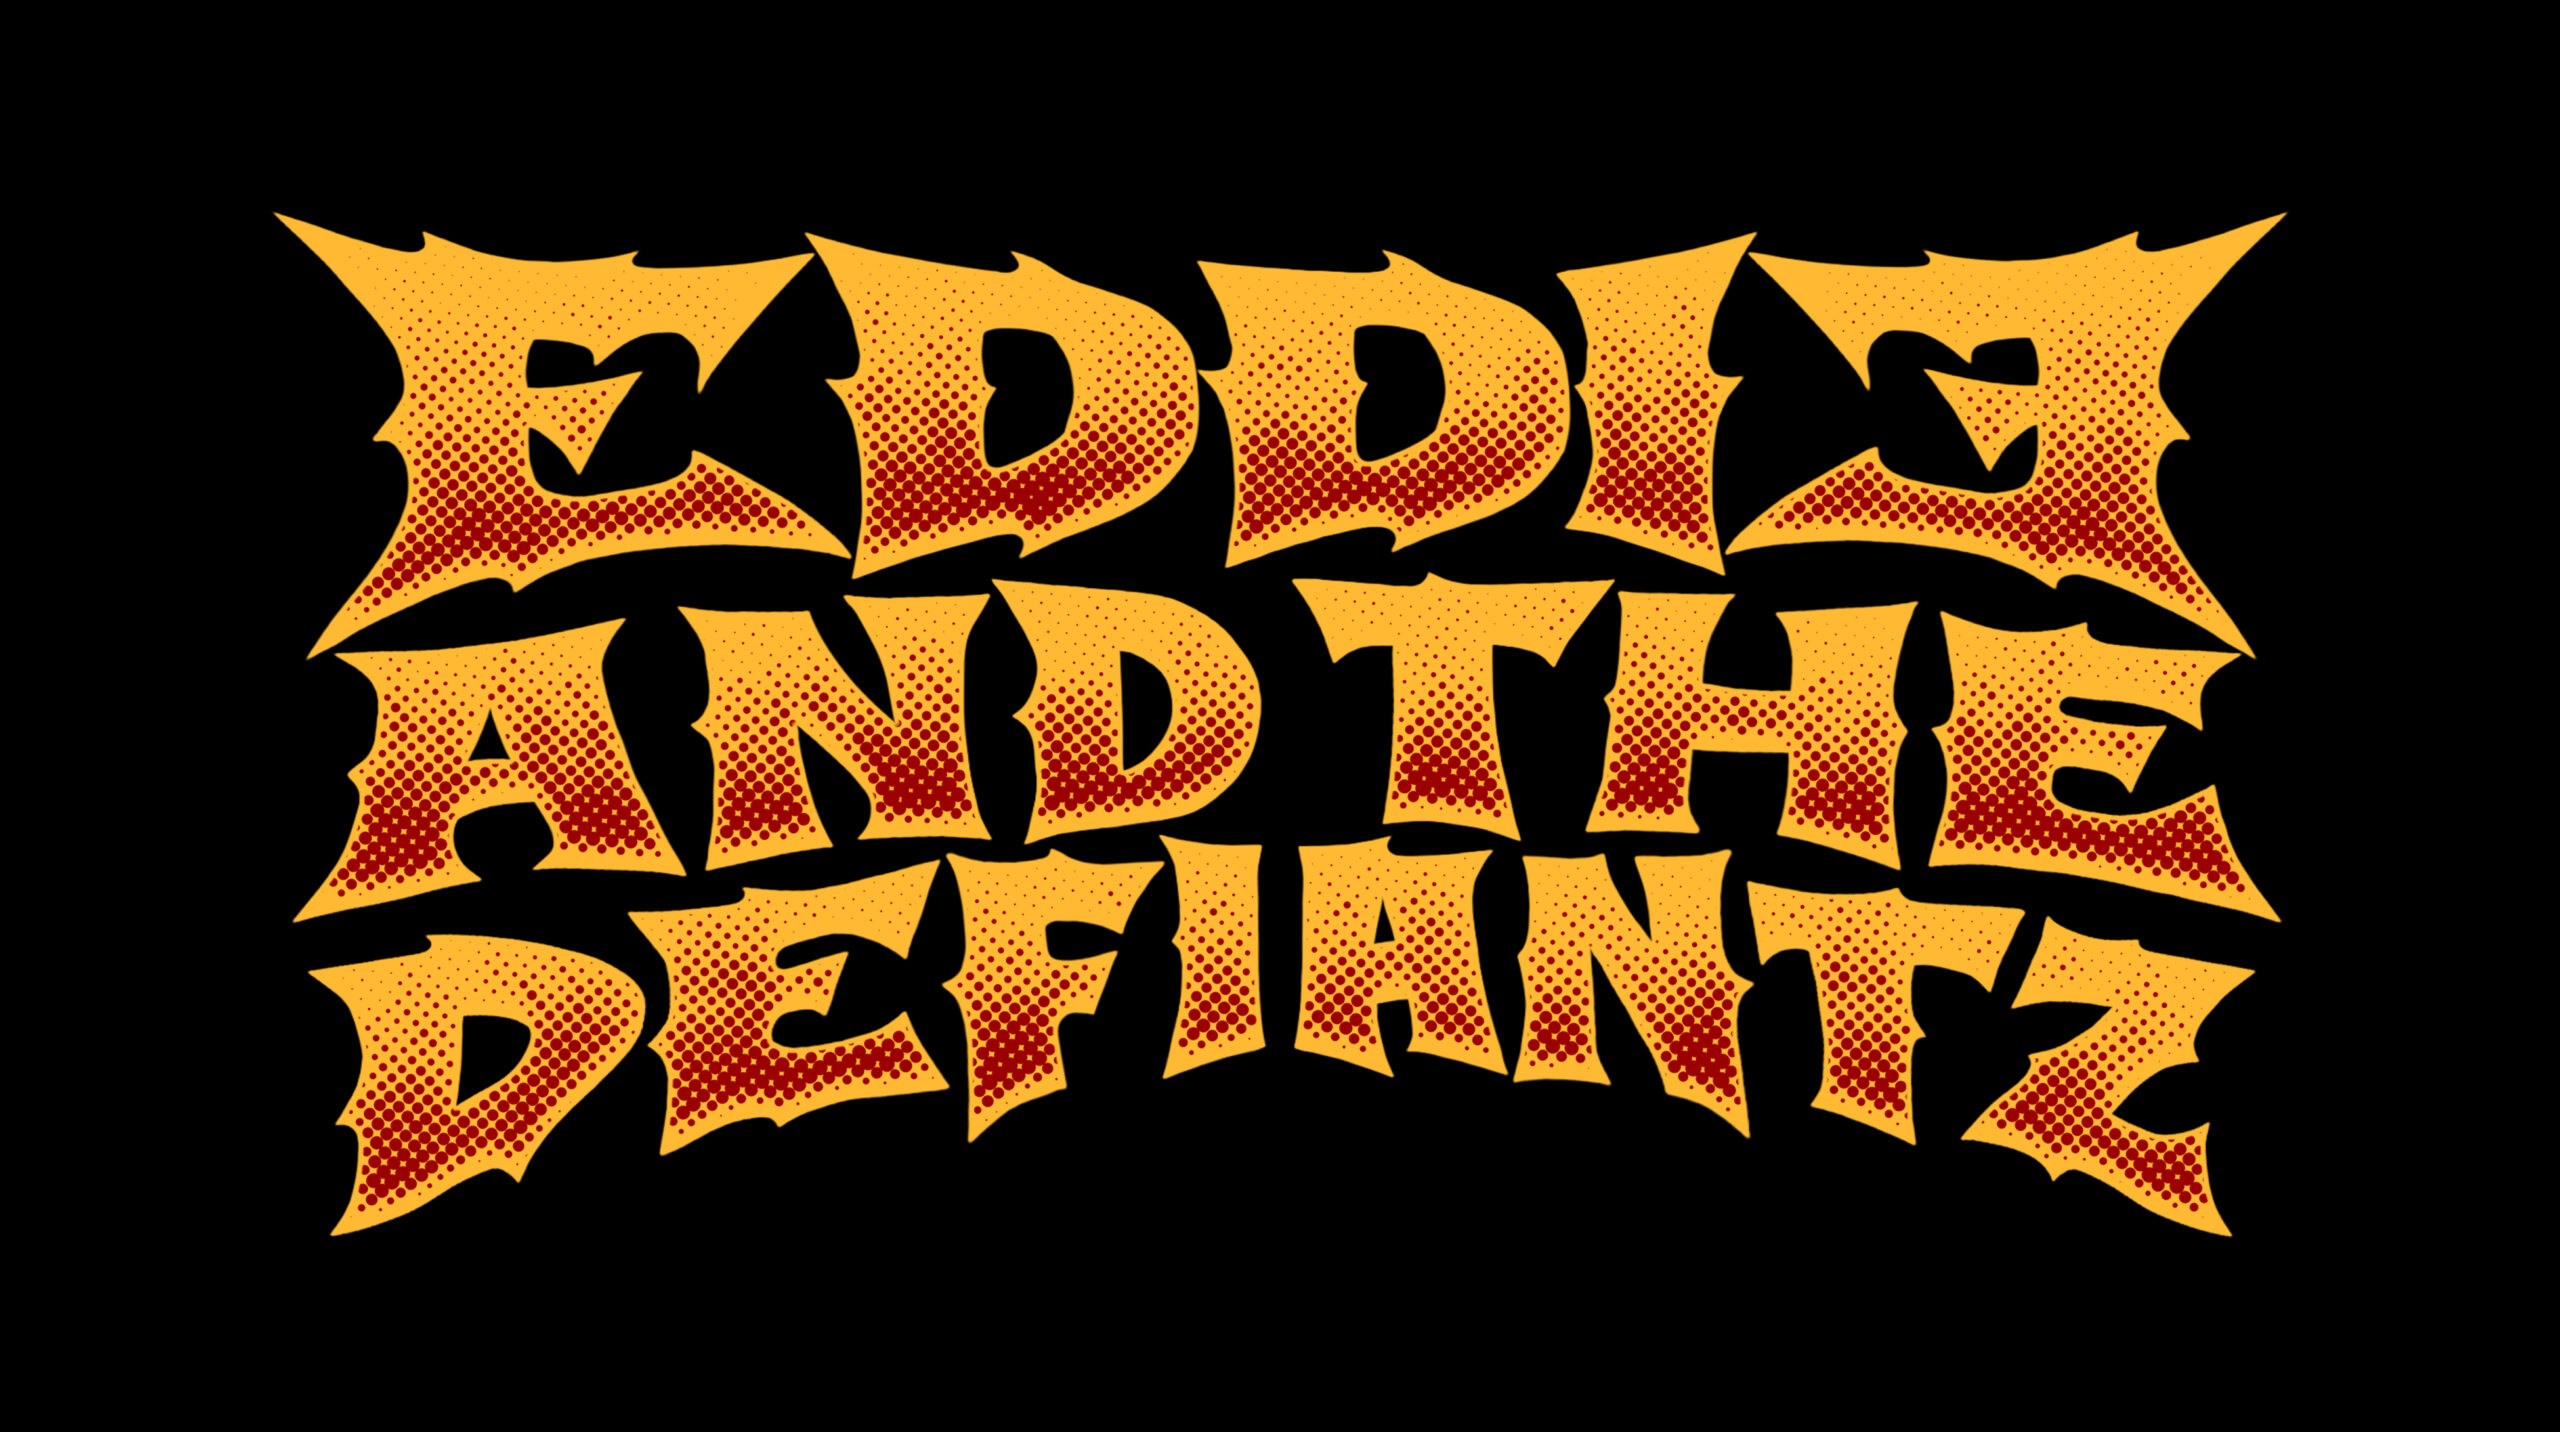 Eddie and the Defiantz - Hard, fast, heavy and a whole lot of METAL!